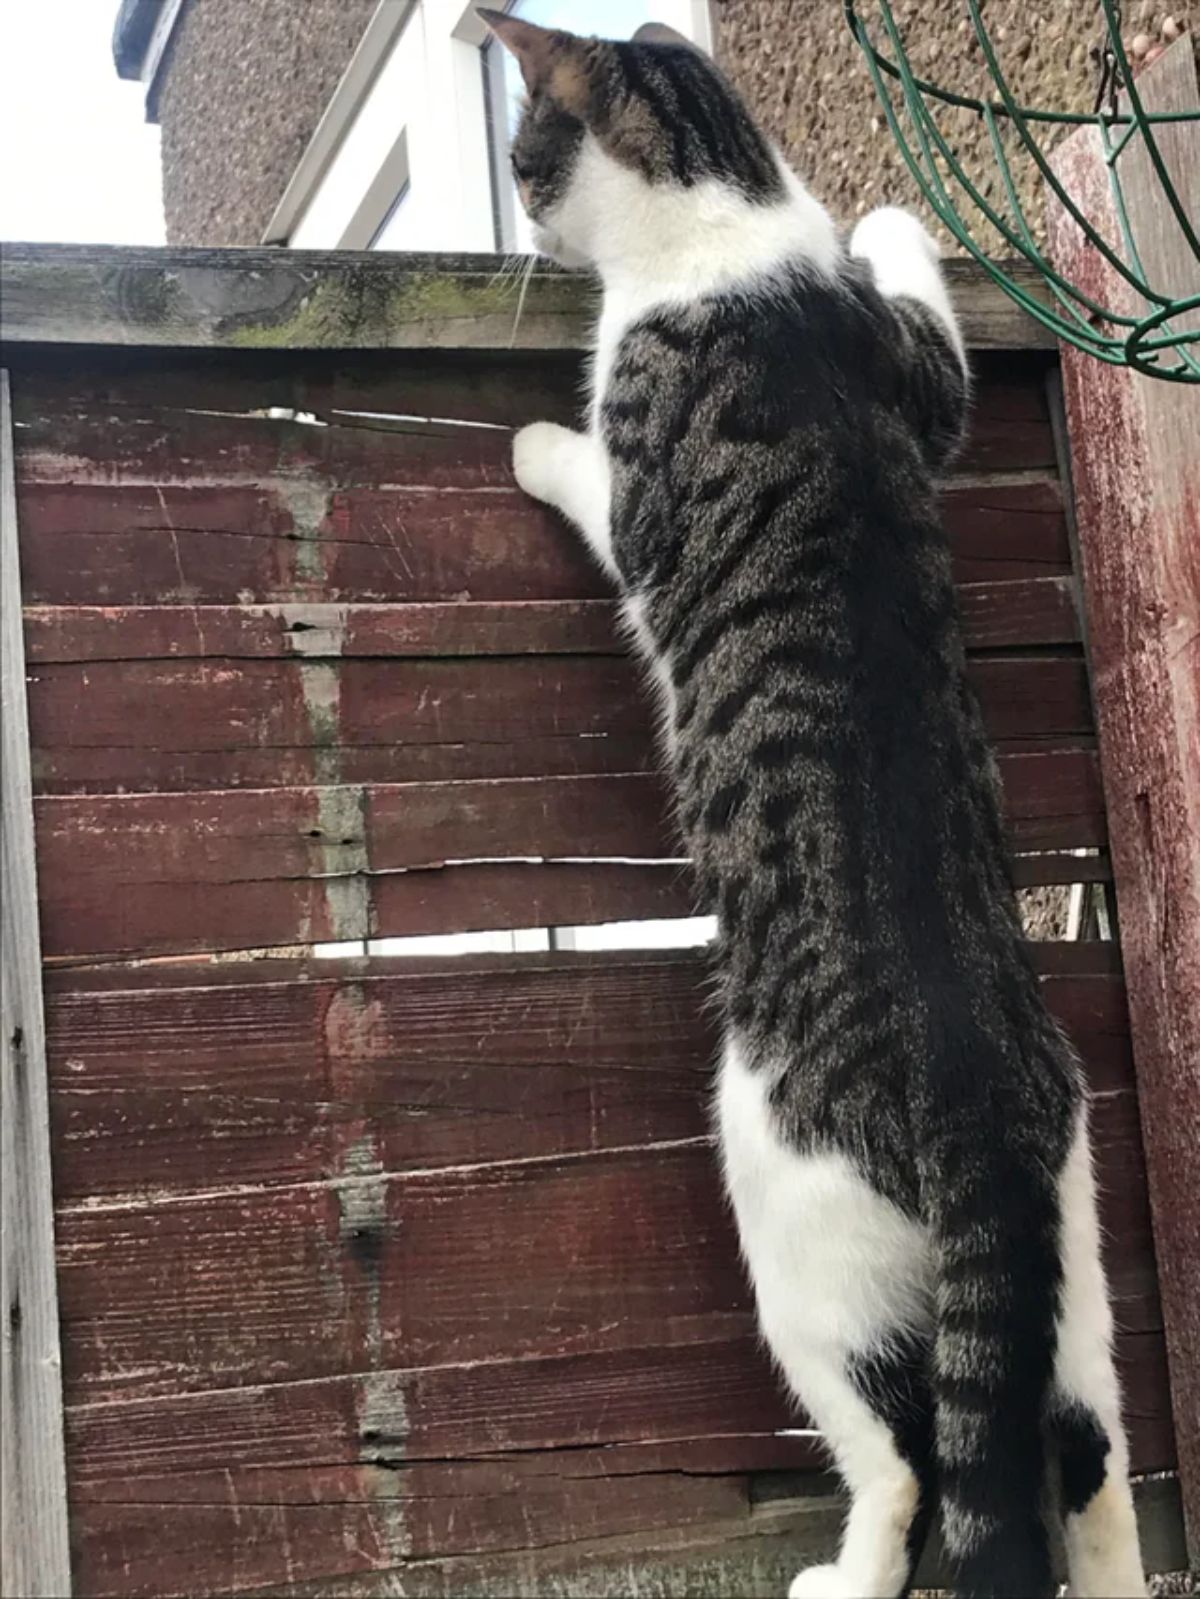 grey and white tabby cat standing on hind legs looking over a wooden wall